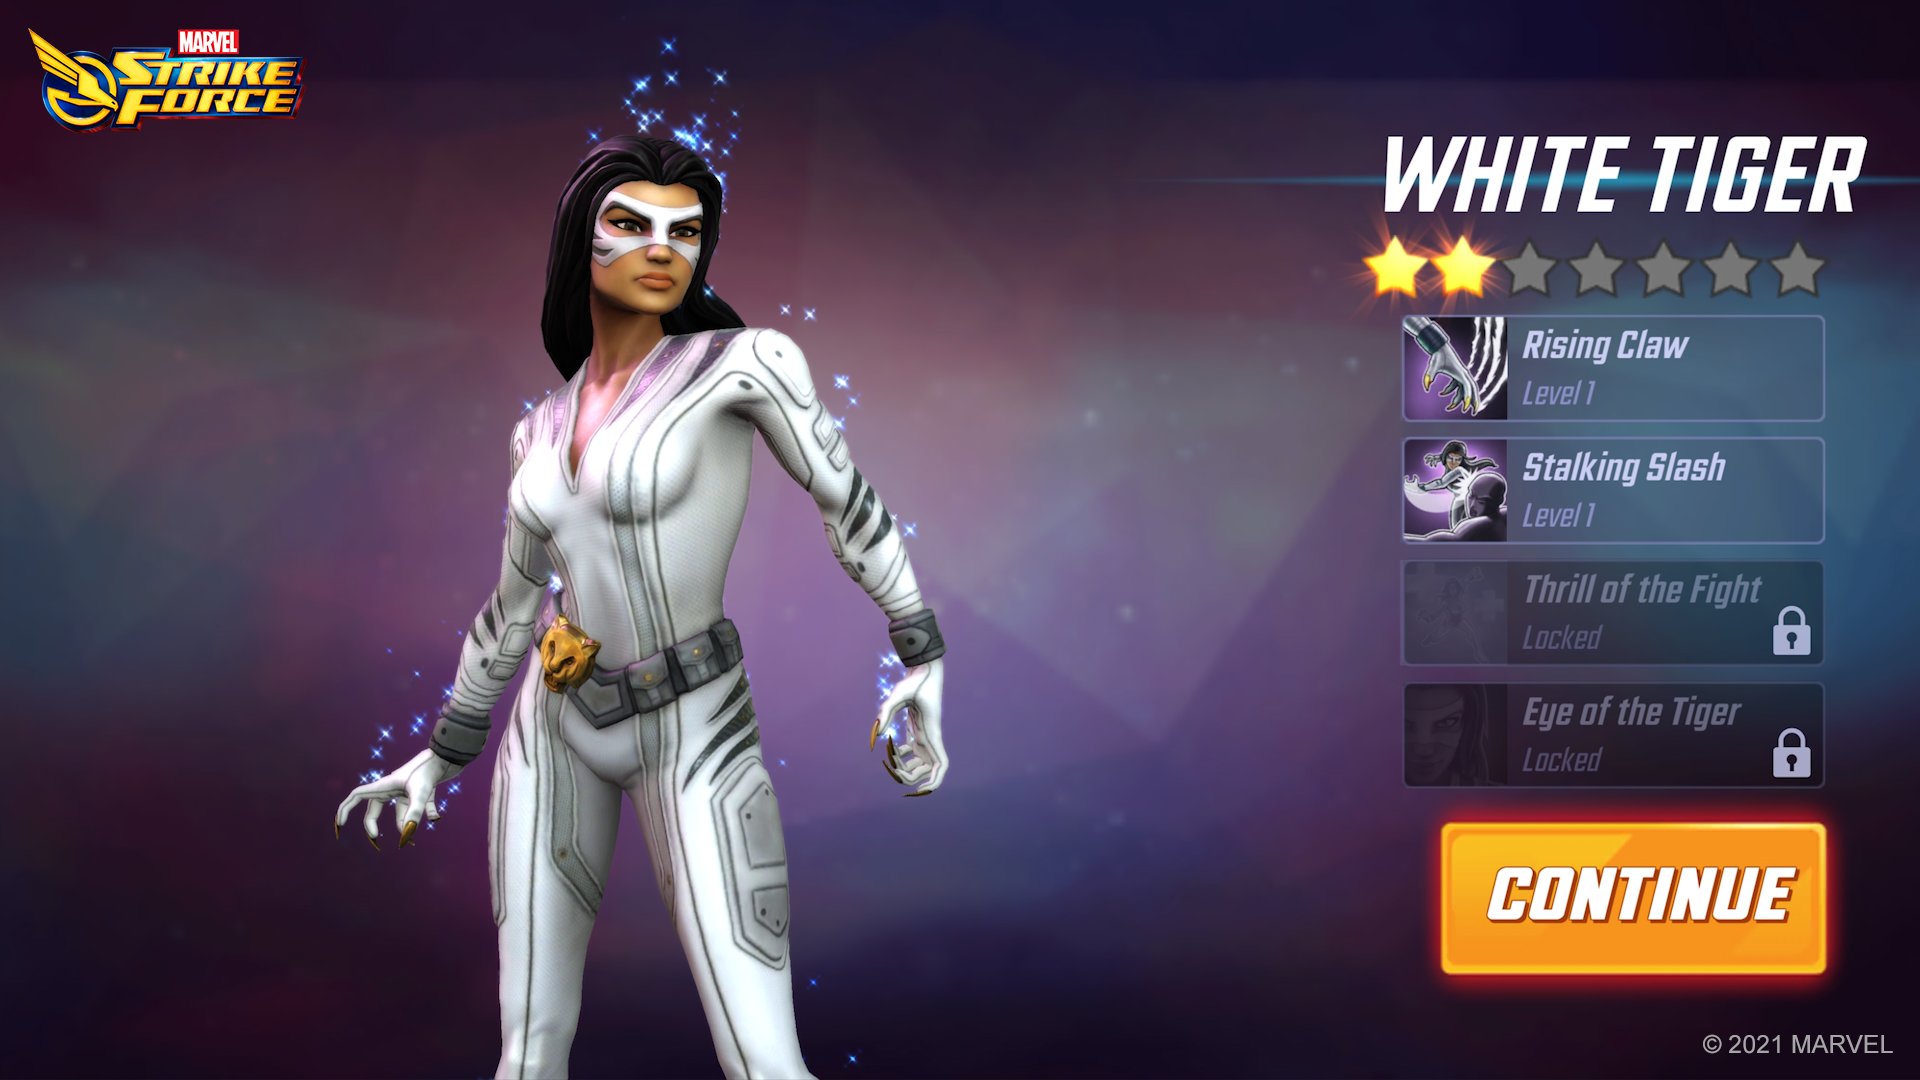 MARVEL Strike Force Introduces Shadowland, White Tiger in Latest